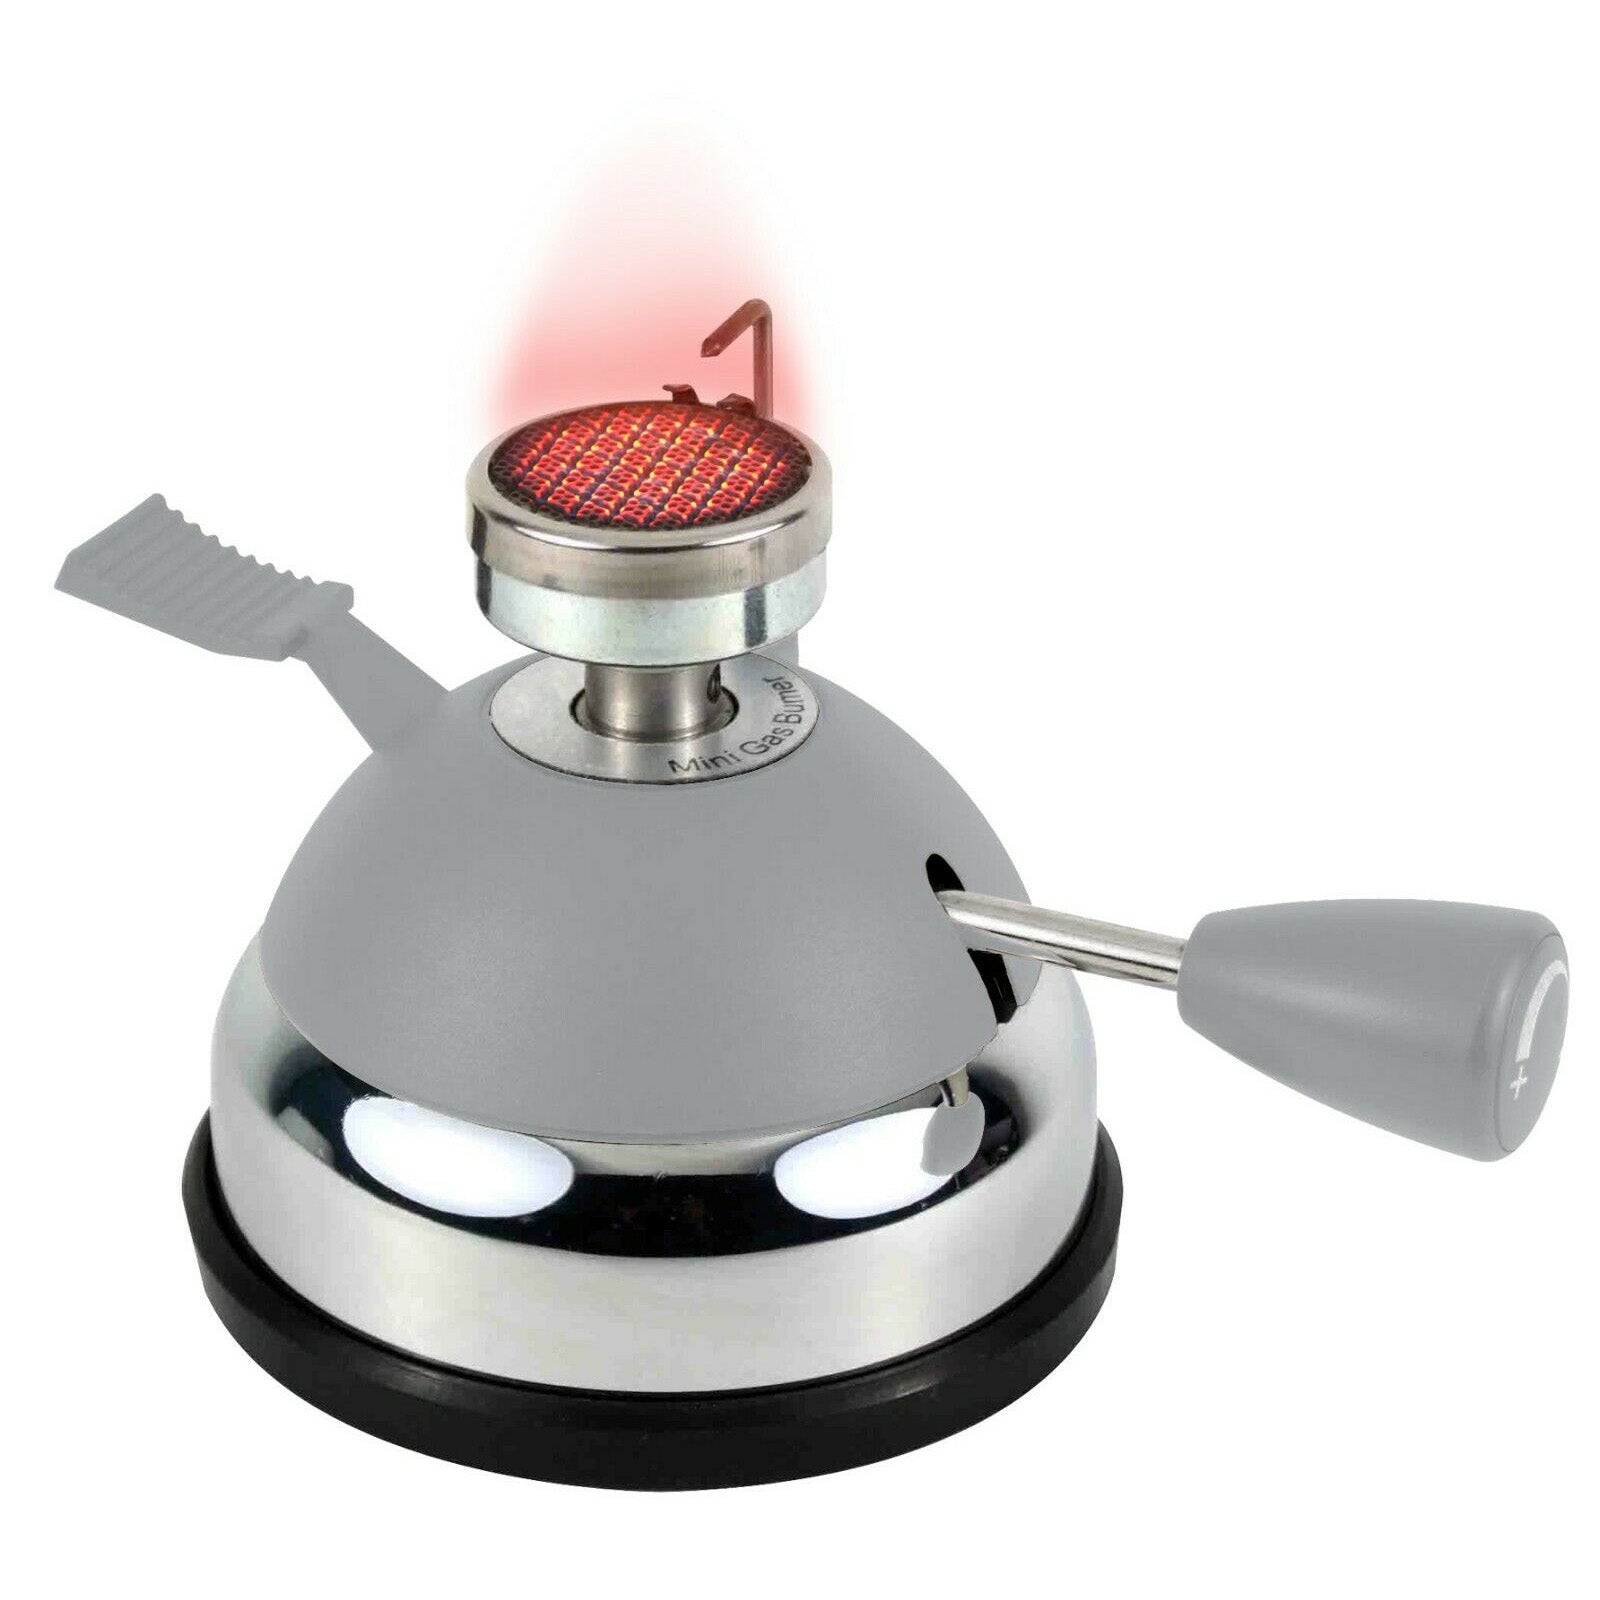 Eastbuy Mini Alcohol Stove Burner - Portable Efficient Stainless Steel Fondue Burner with Anti-scald Handle and Safety Cover, Camping Panic Cooking